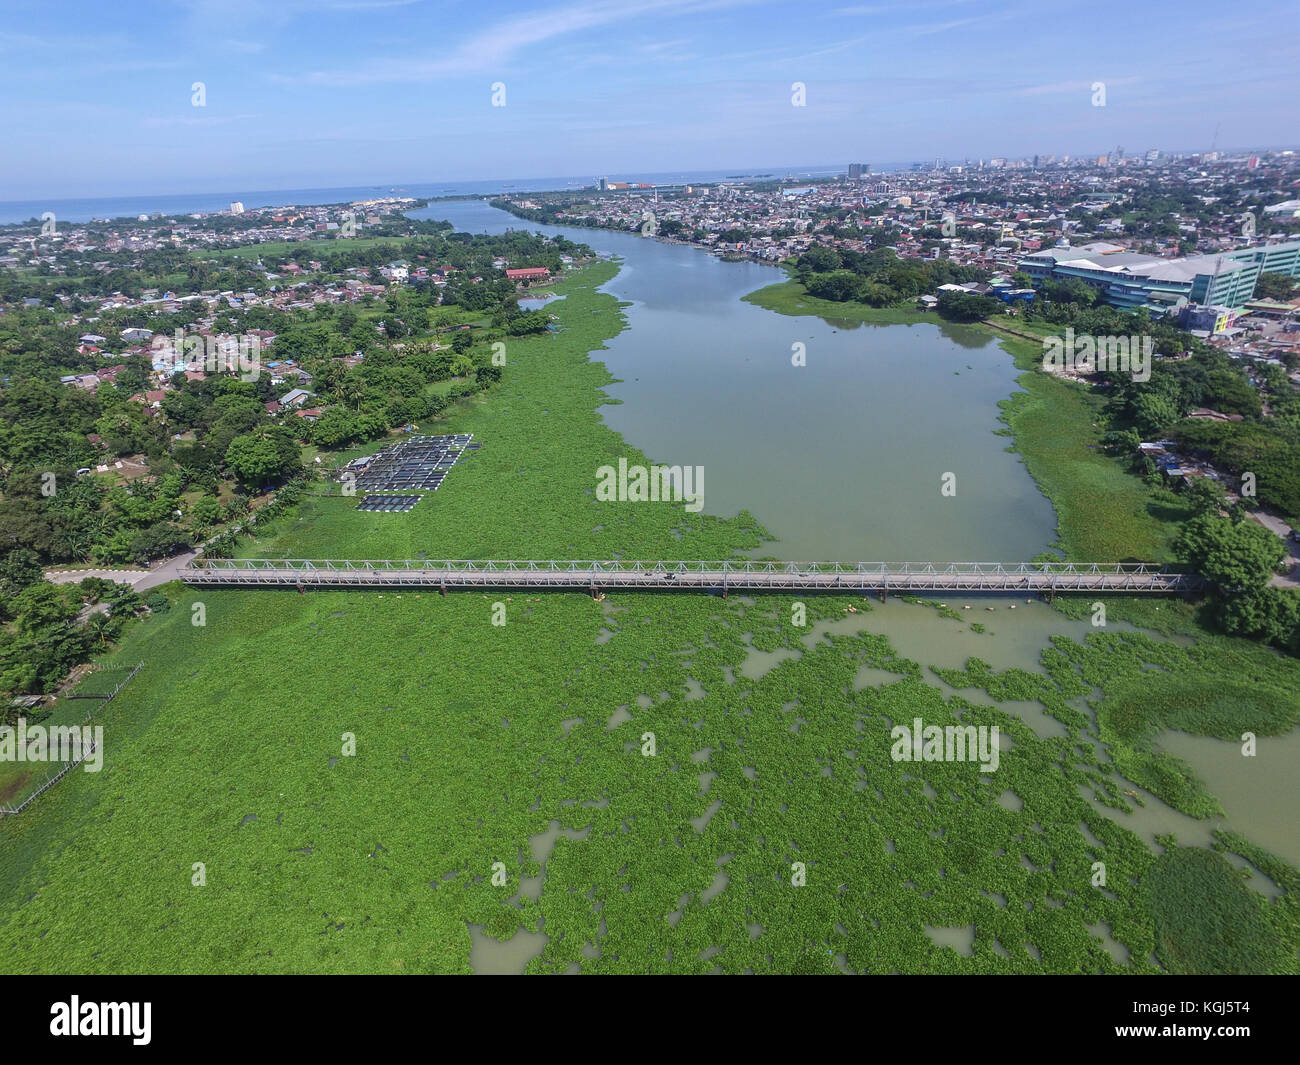 Water Hyacinth in Jeneberang River in Makassar. The growth of the Water Hyacinth may damage the ecosystem in the river due to lack of oxygen. Stock Photo